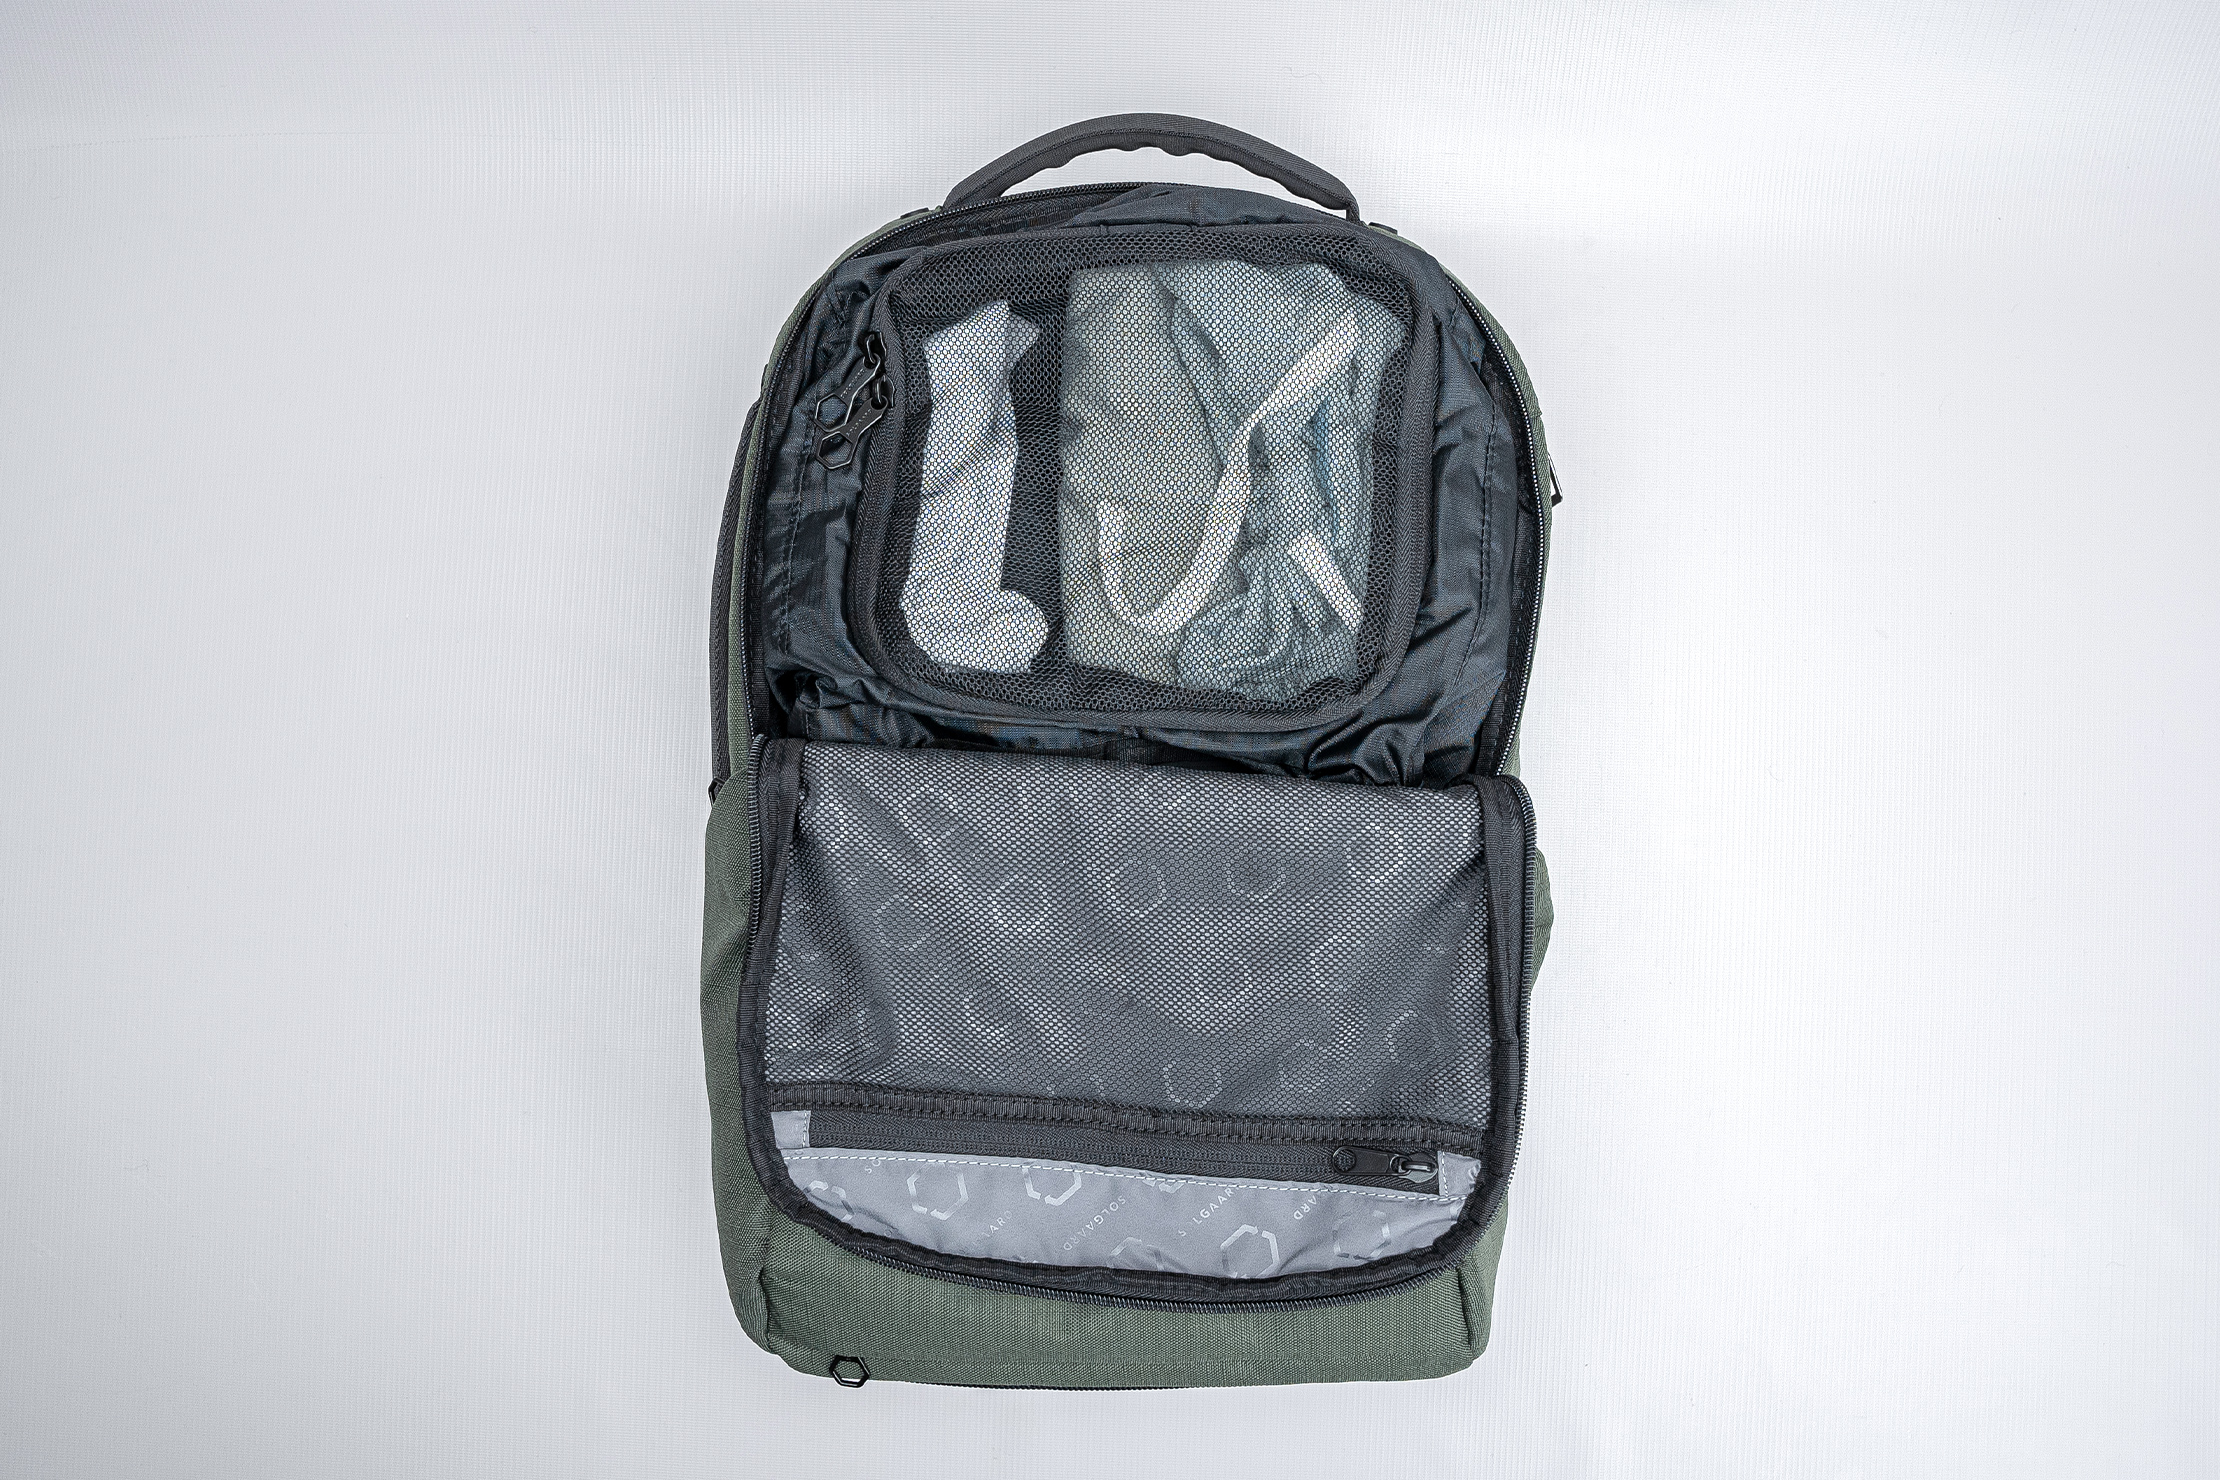 Solgaard Lifepack Endeavor (with closet) | Getting it inside is way easier once the bag’s been expanded.